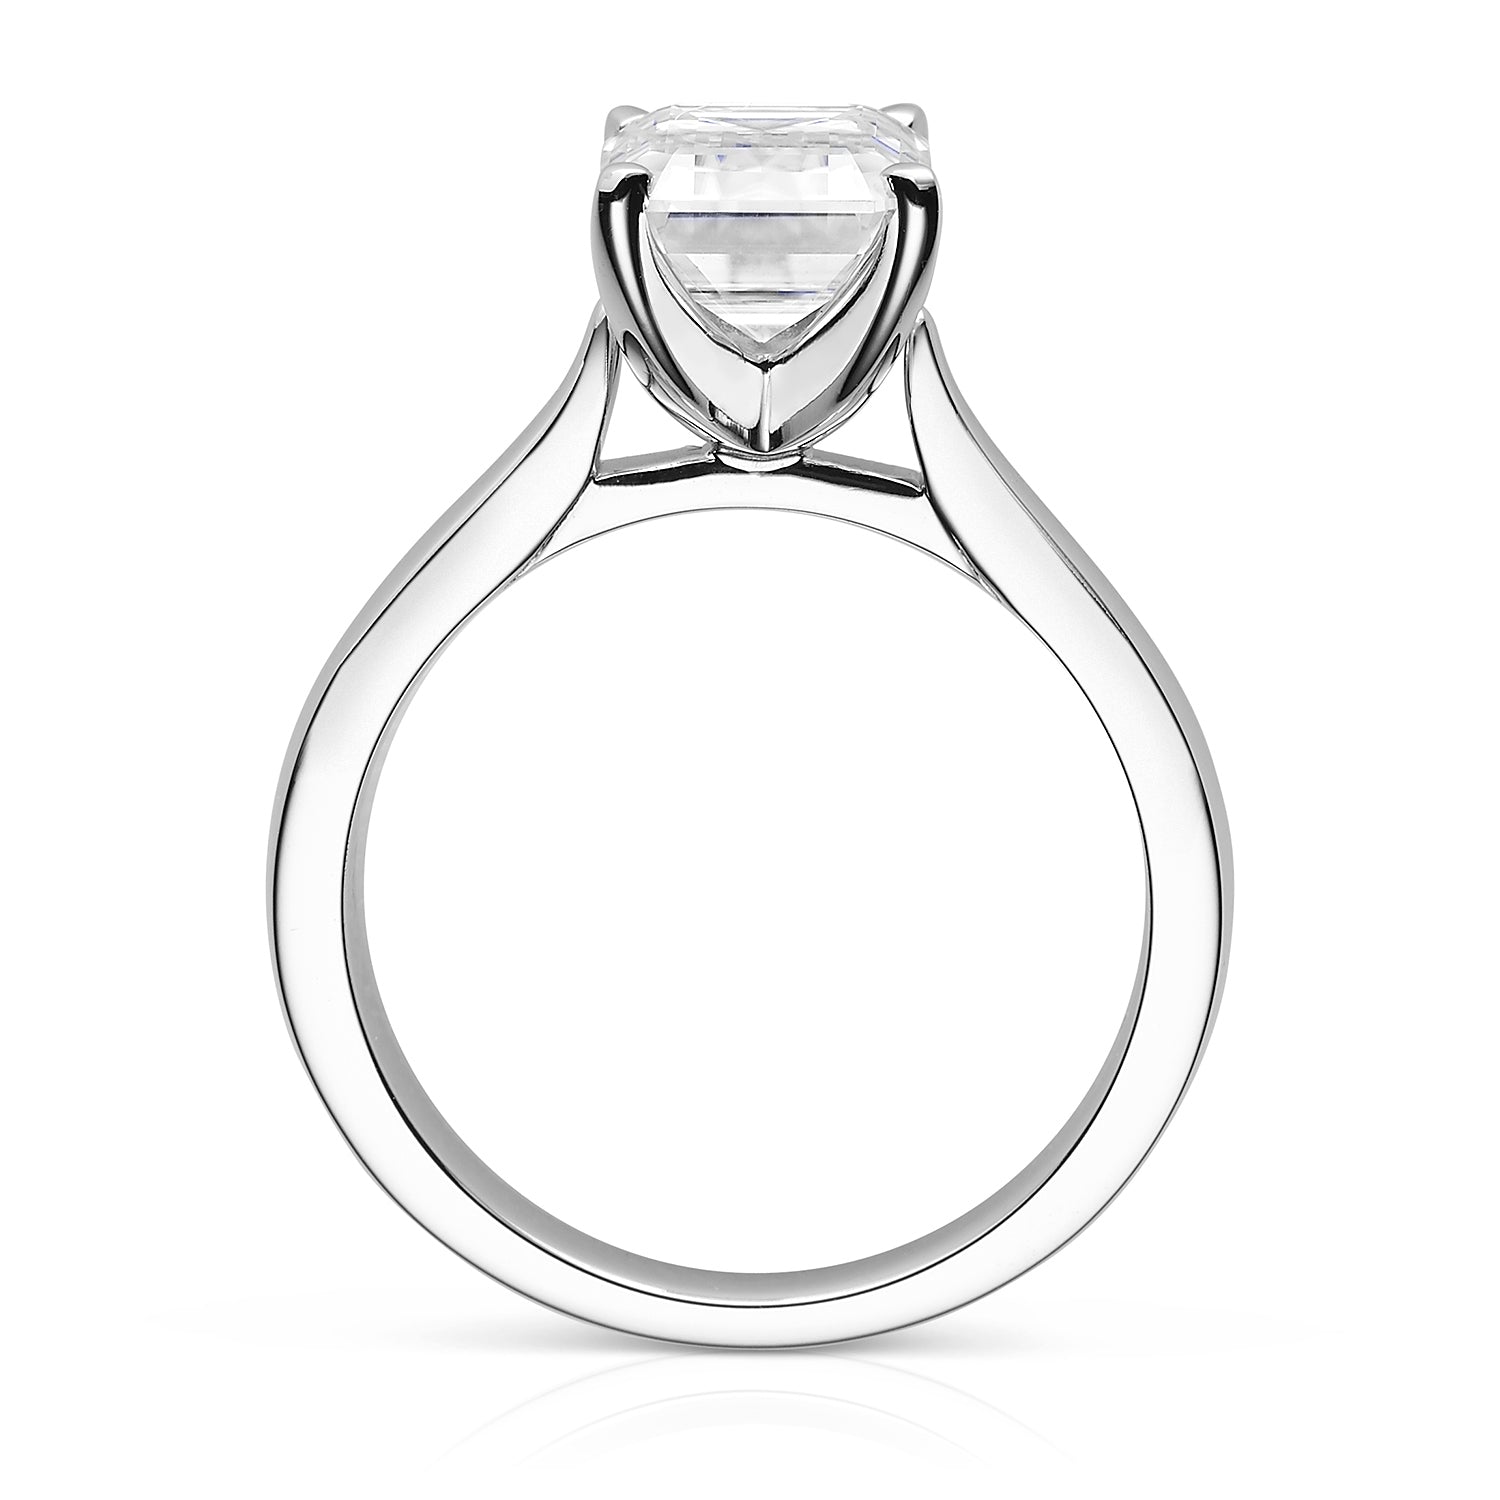 Charles & Colvard Moissanite Emerald Cut Solitaire Engagement Ring in White Gold-612945 - Jewelry by Johan